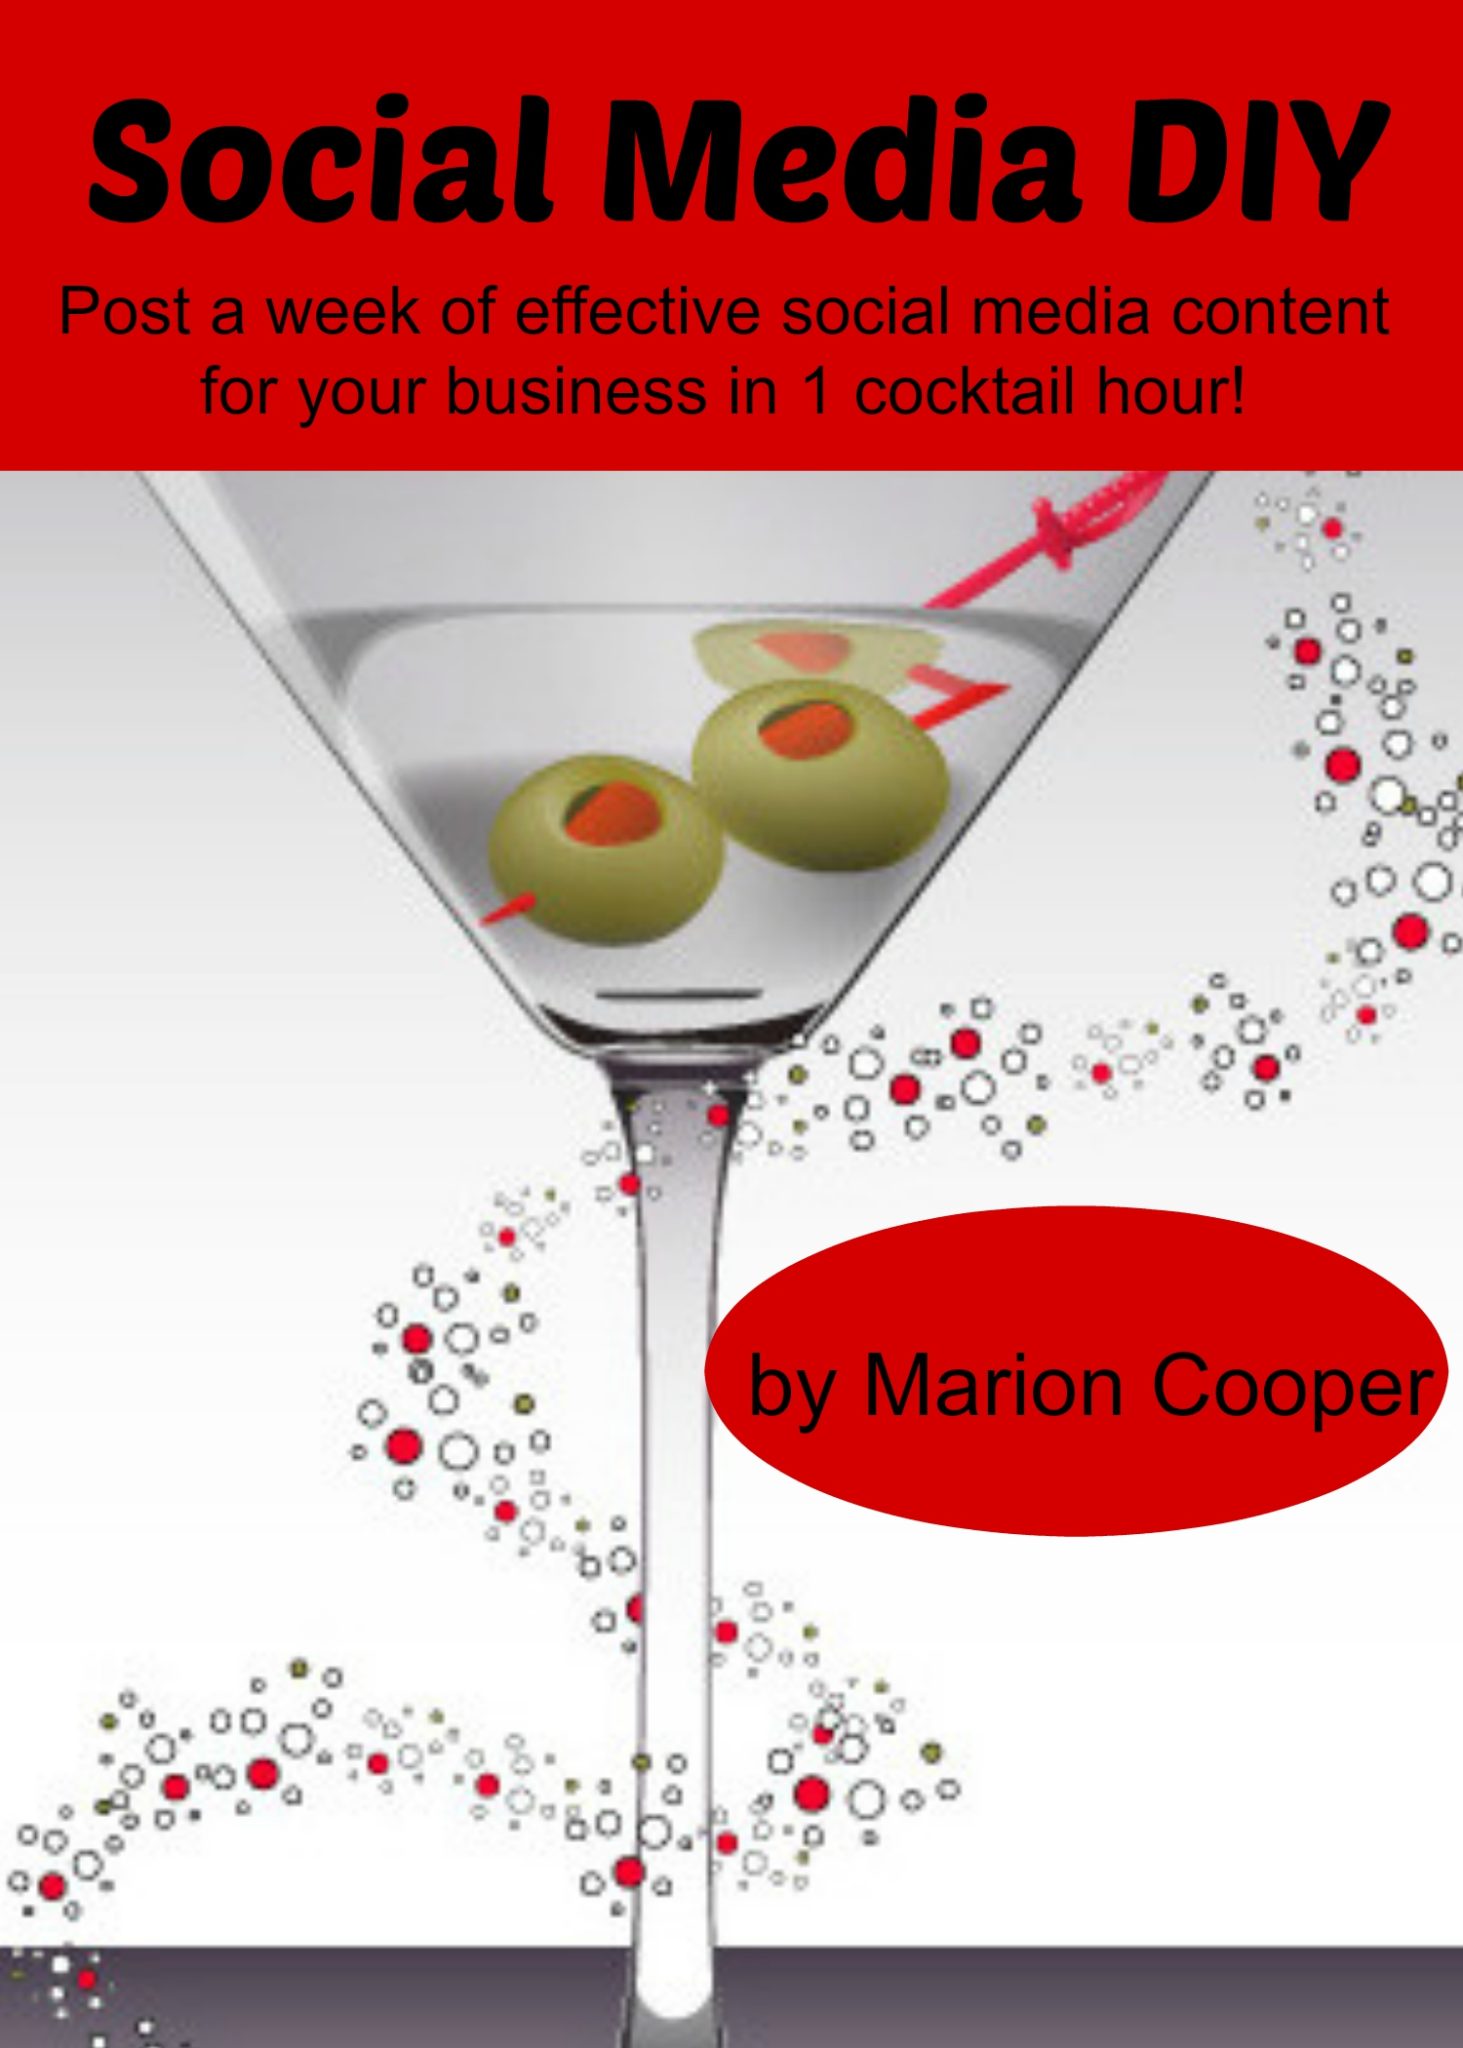 FREE: Social Media DIY: Post a week of effective social media content for your buisness in 1 cocktail hour! by Marion Cooper